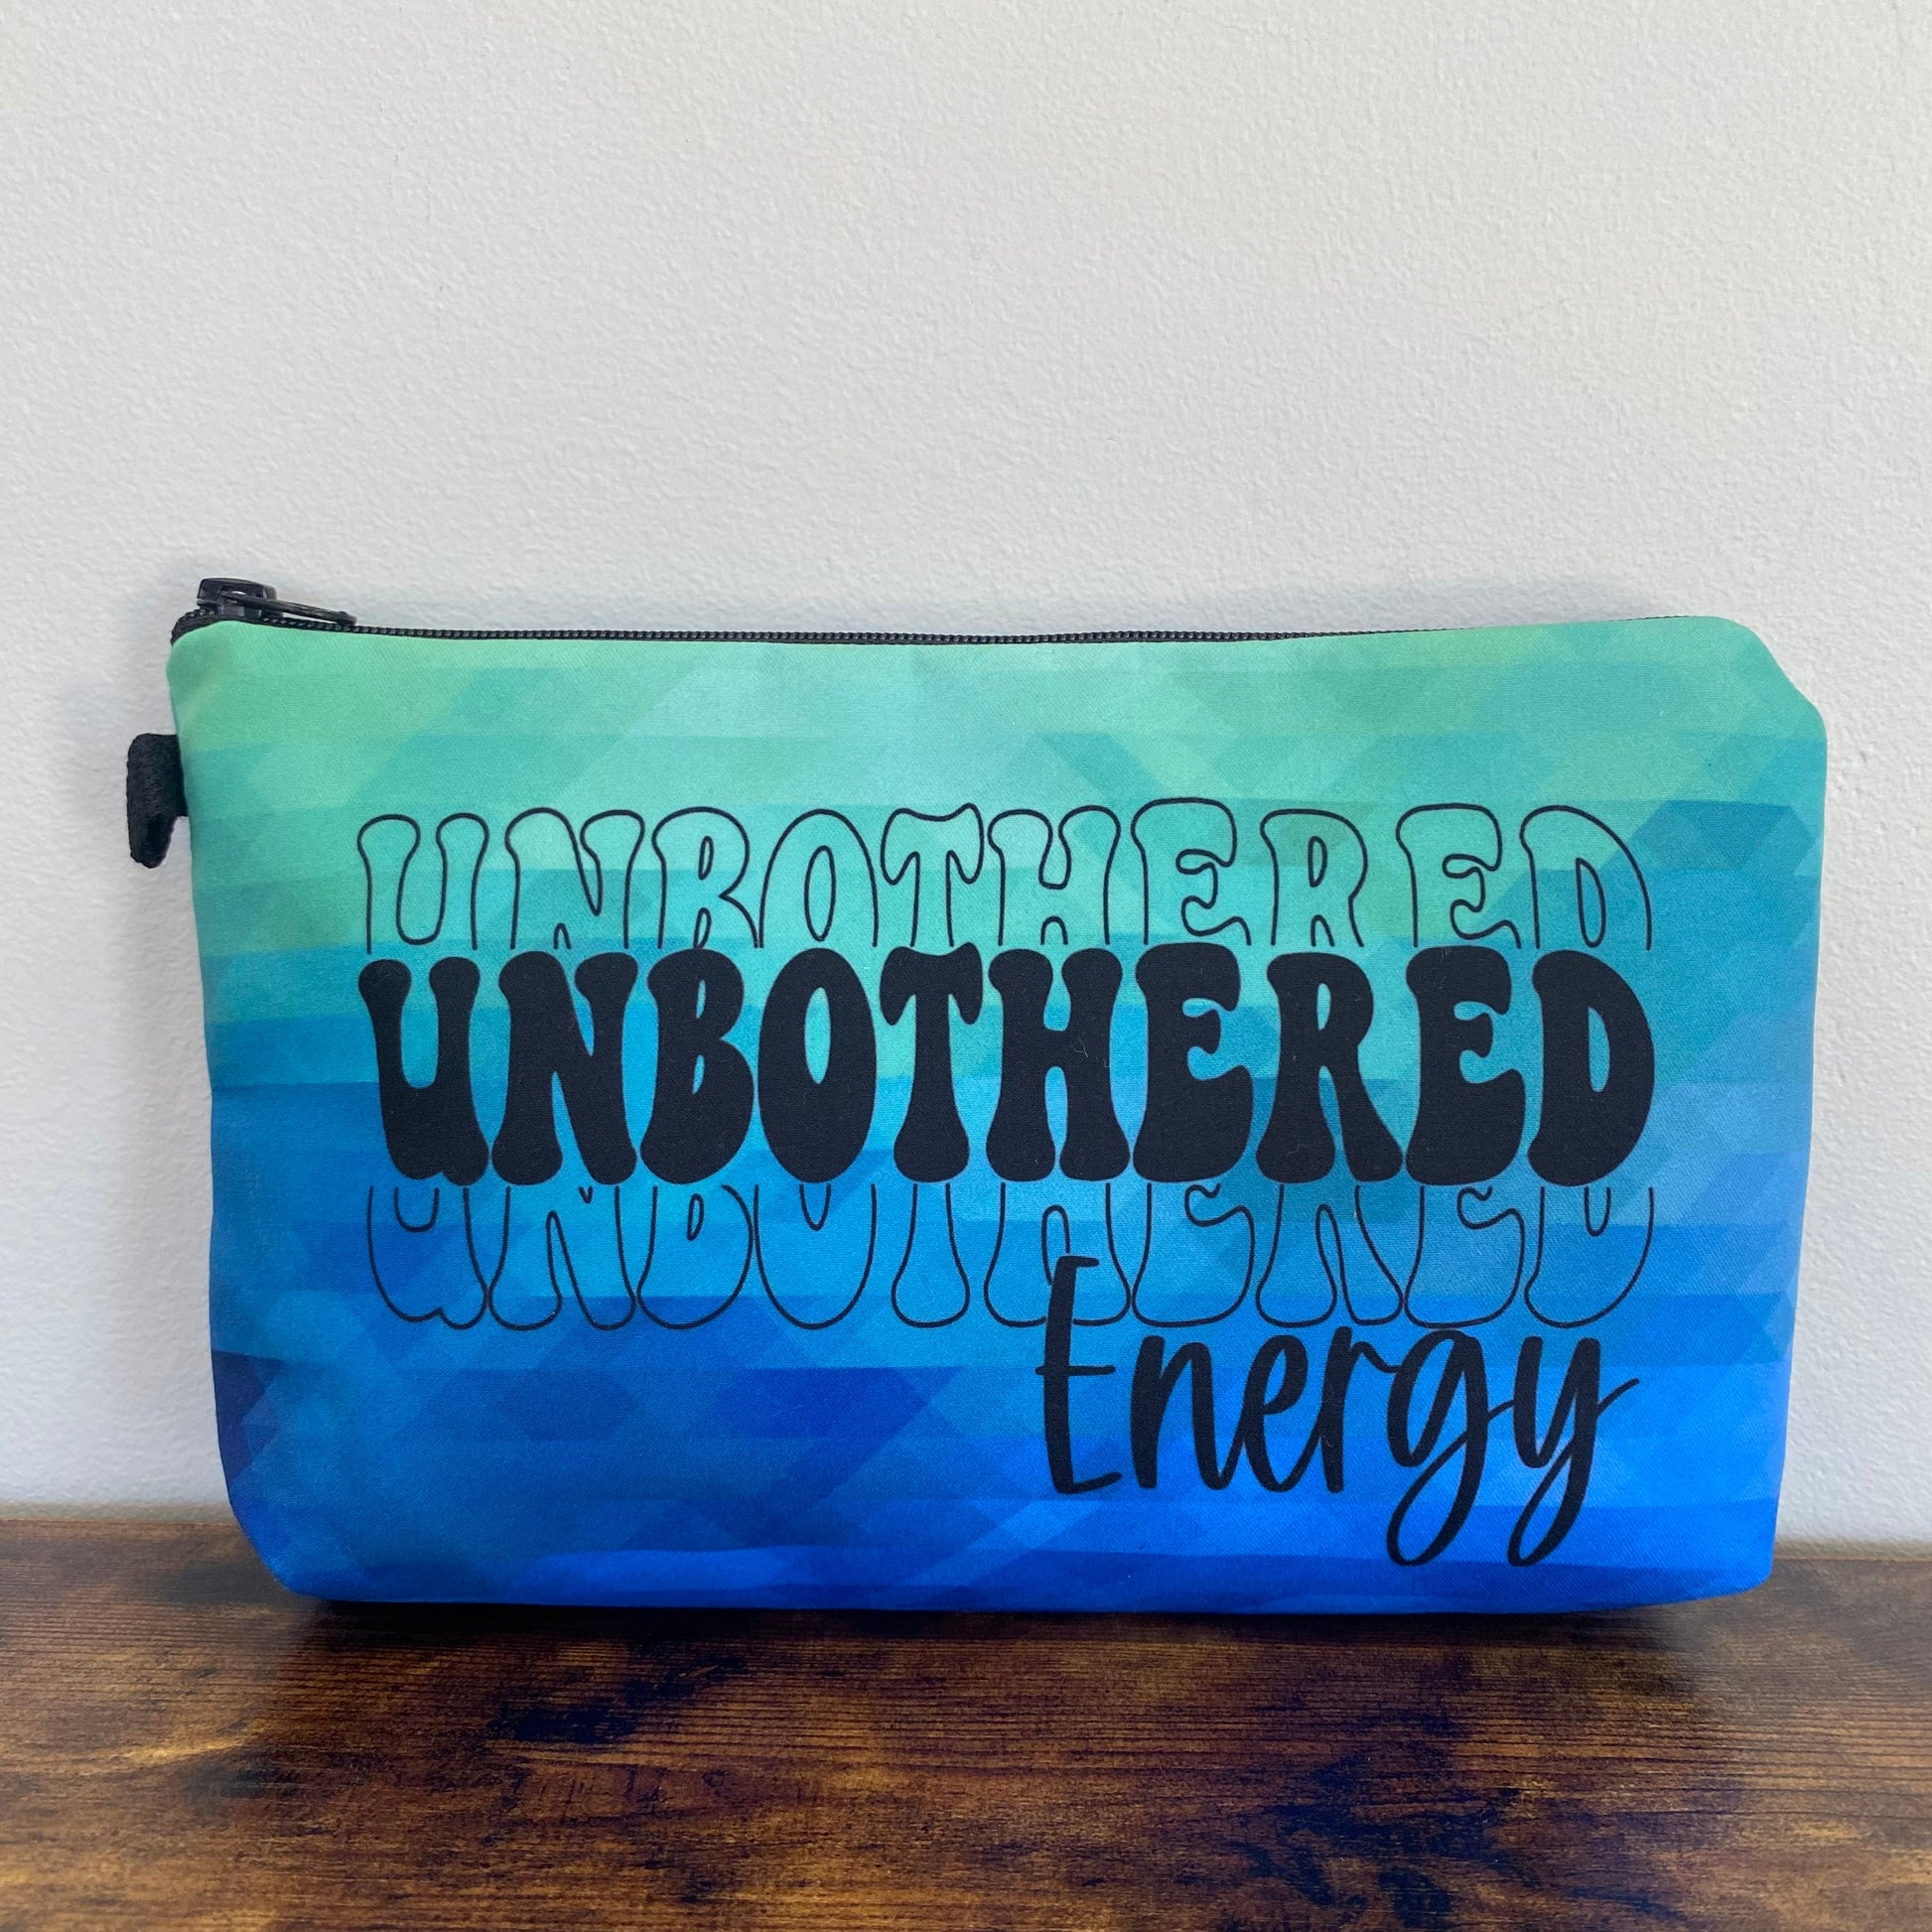 Pouch - Adult, Unbothered Energy - Three Bears Boutique